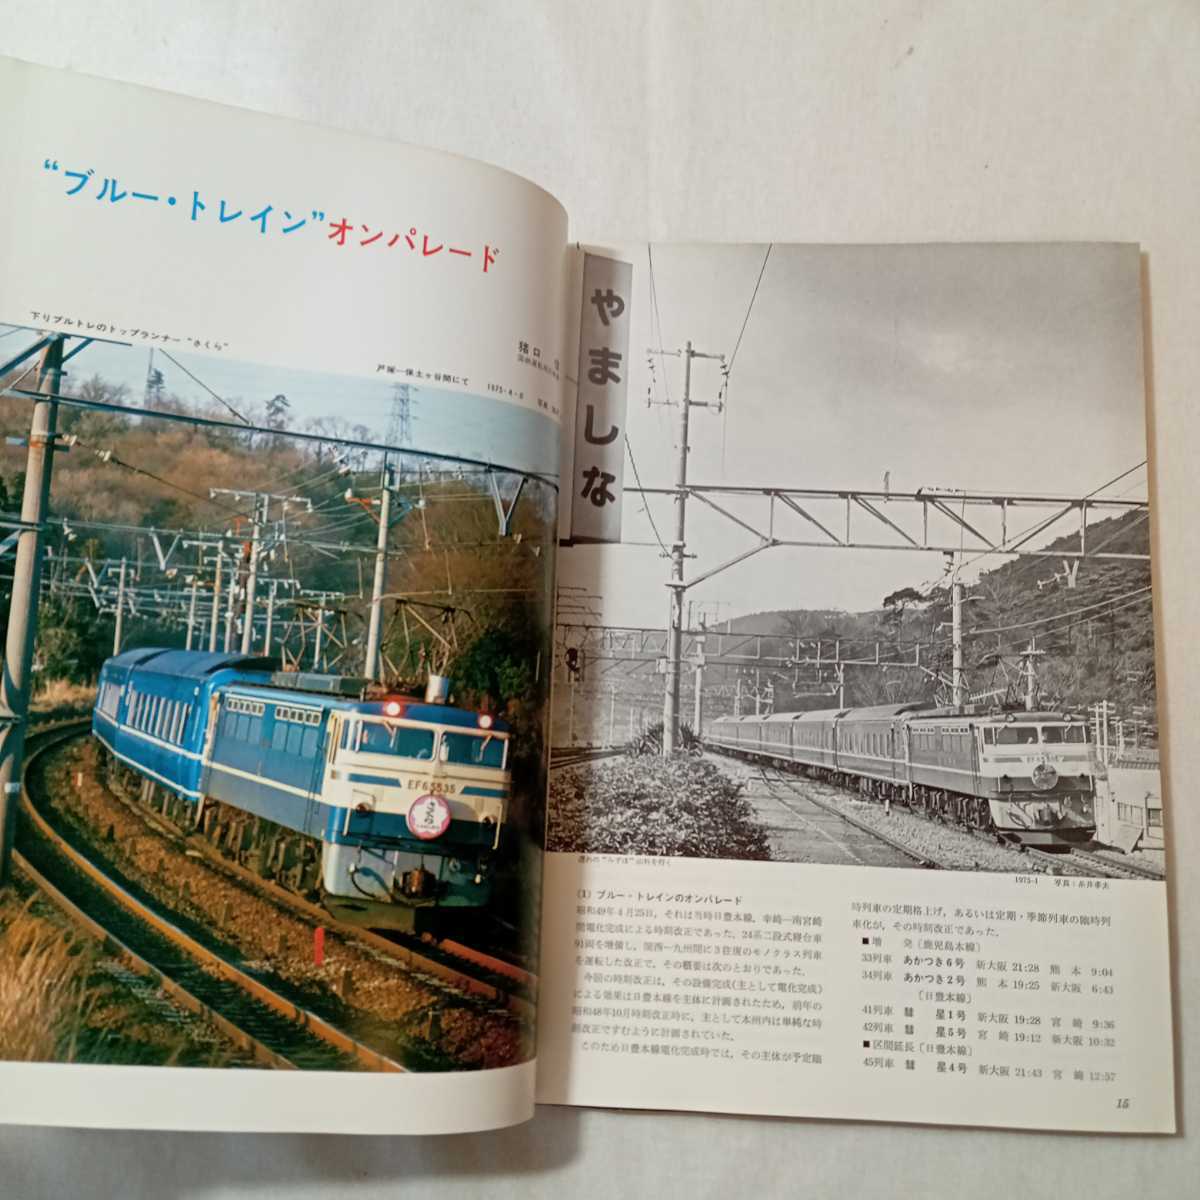 zaa-373! The Rail Fan 177 1975 year 7 month number blue *to rain higashi . west .- that 1-| various river .